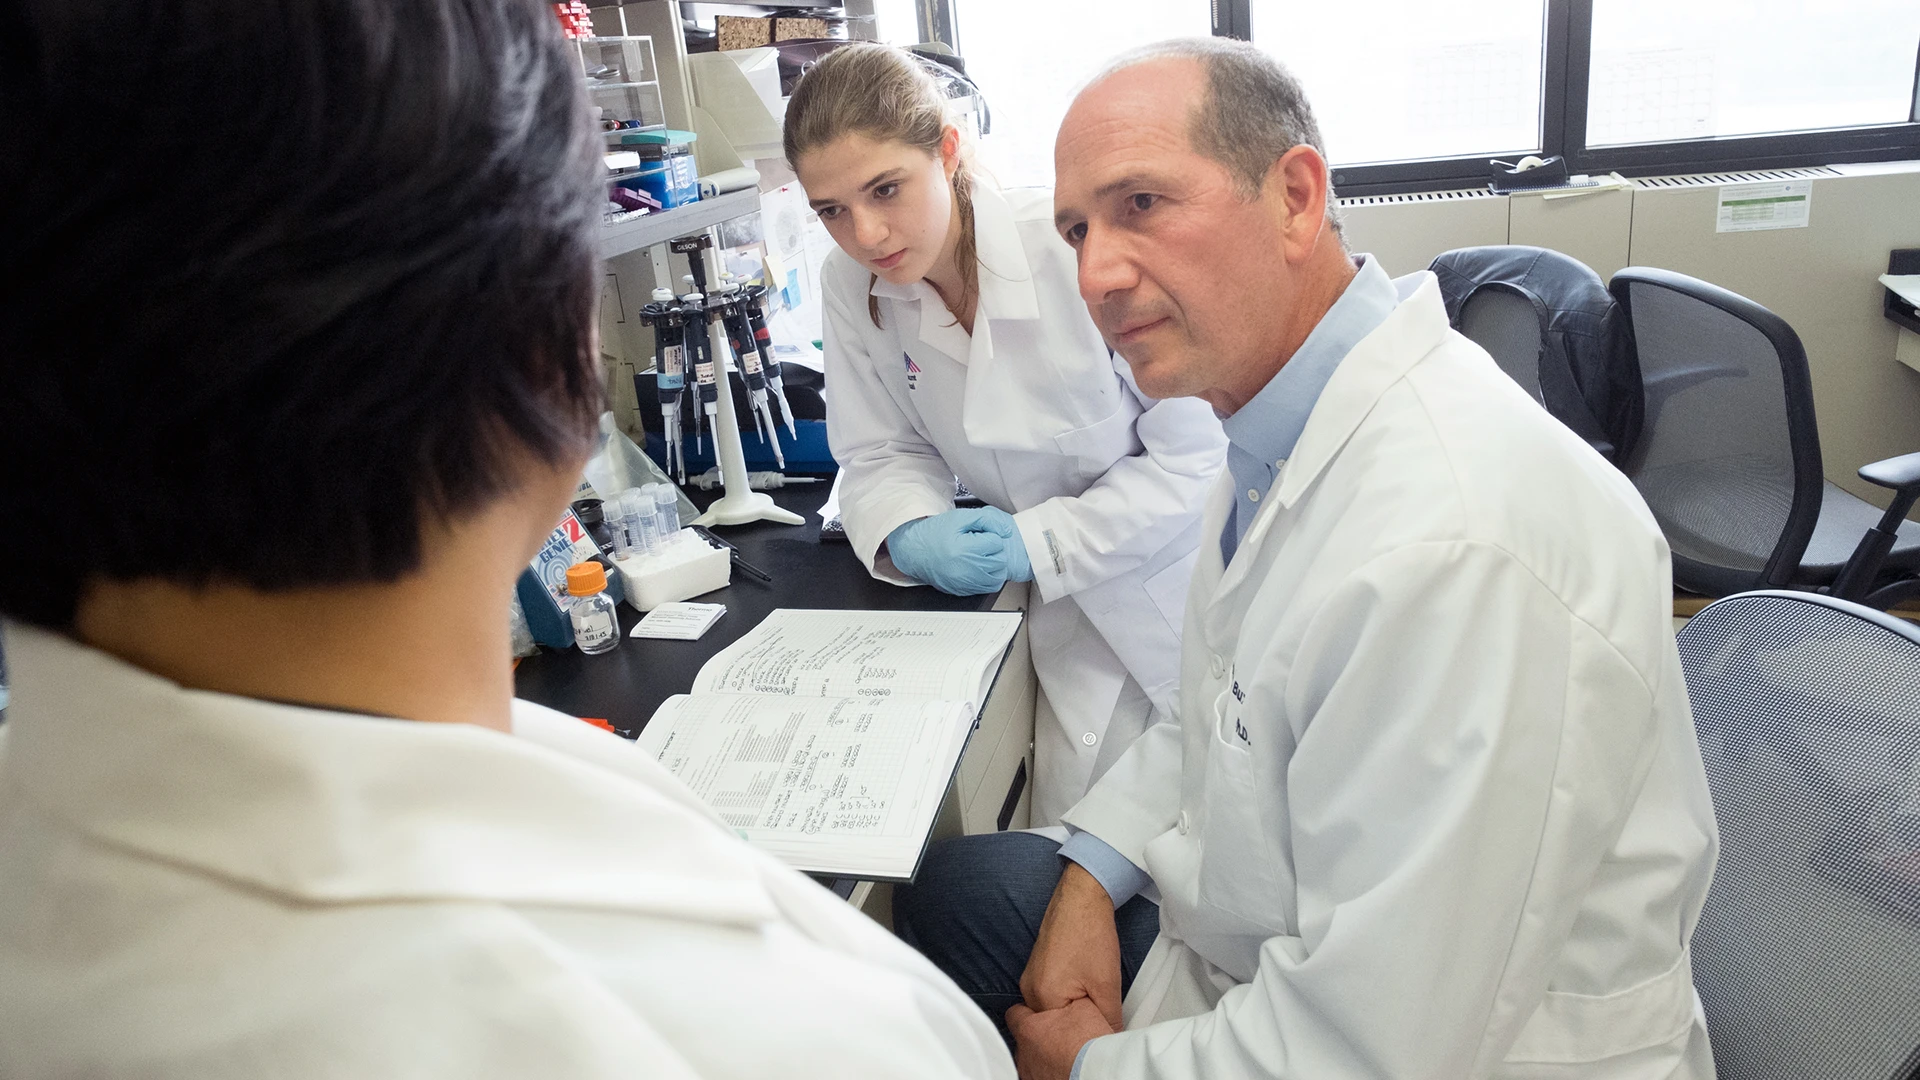 Joseph D. Buxbaum, PhD (right), oversees the Seaver Autism Center for Research and Treatment, which studies the disorder with a focus on genetics.